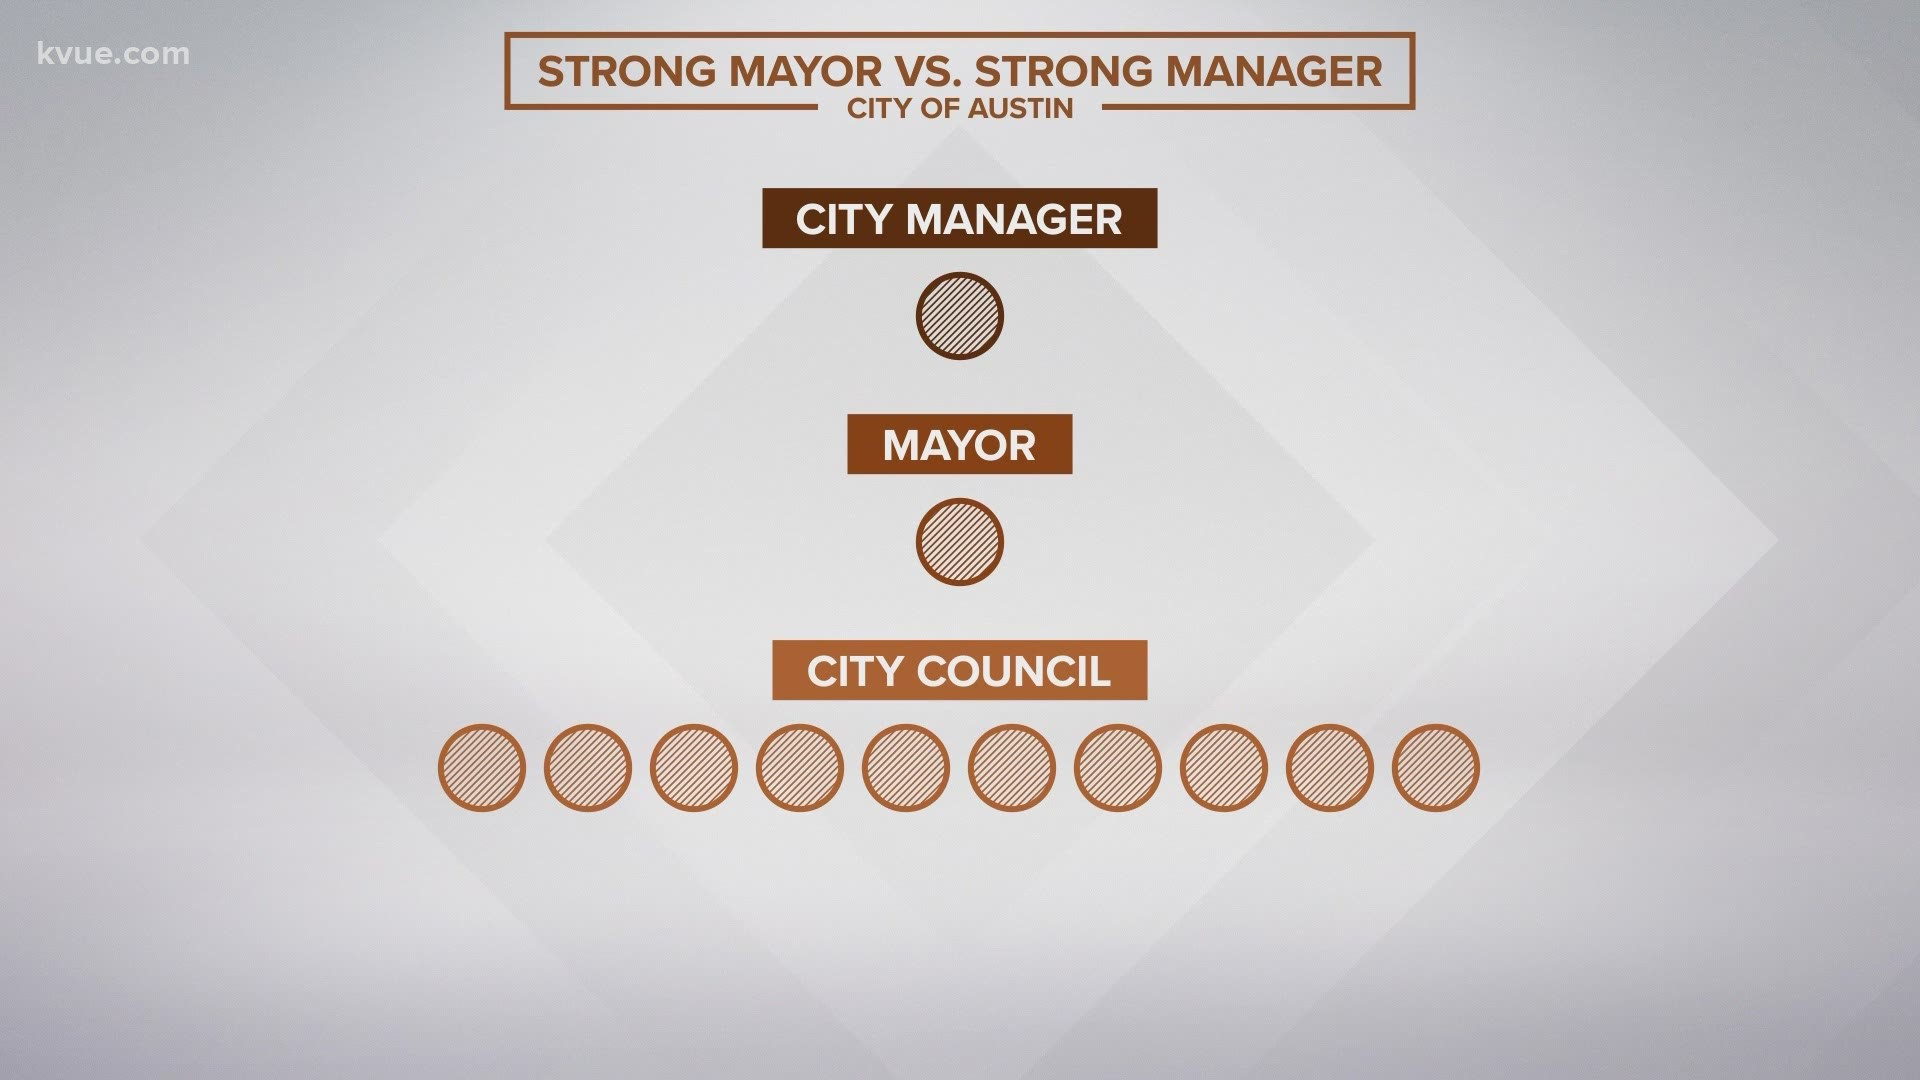 Proposition F is a May 1 ballot measure that would create a strong mayor-council form of governance for the City of Austin.